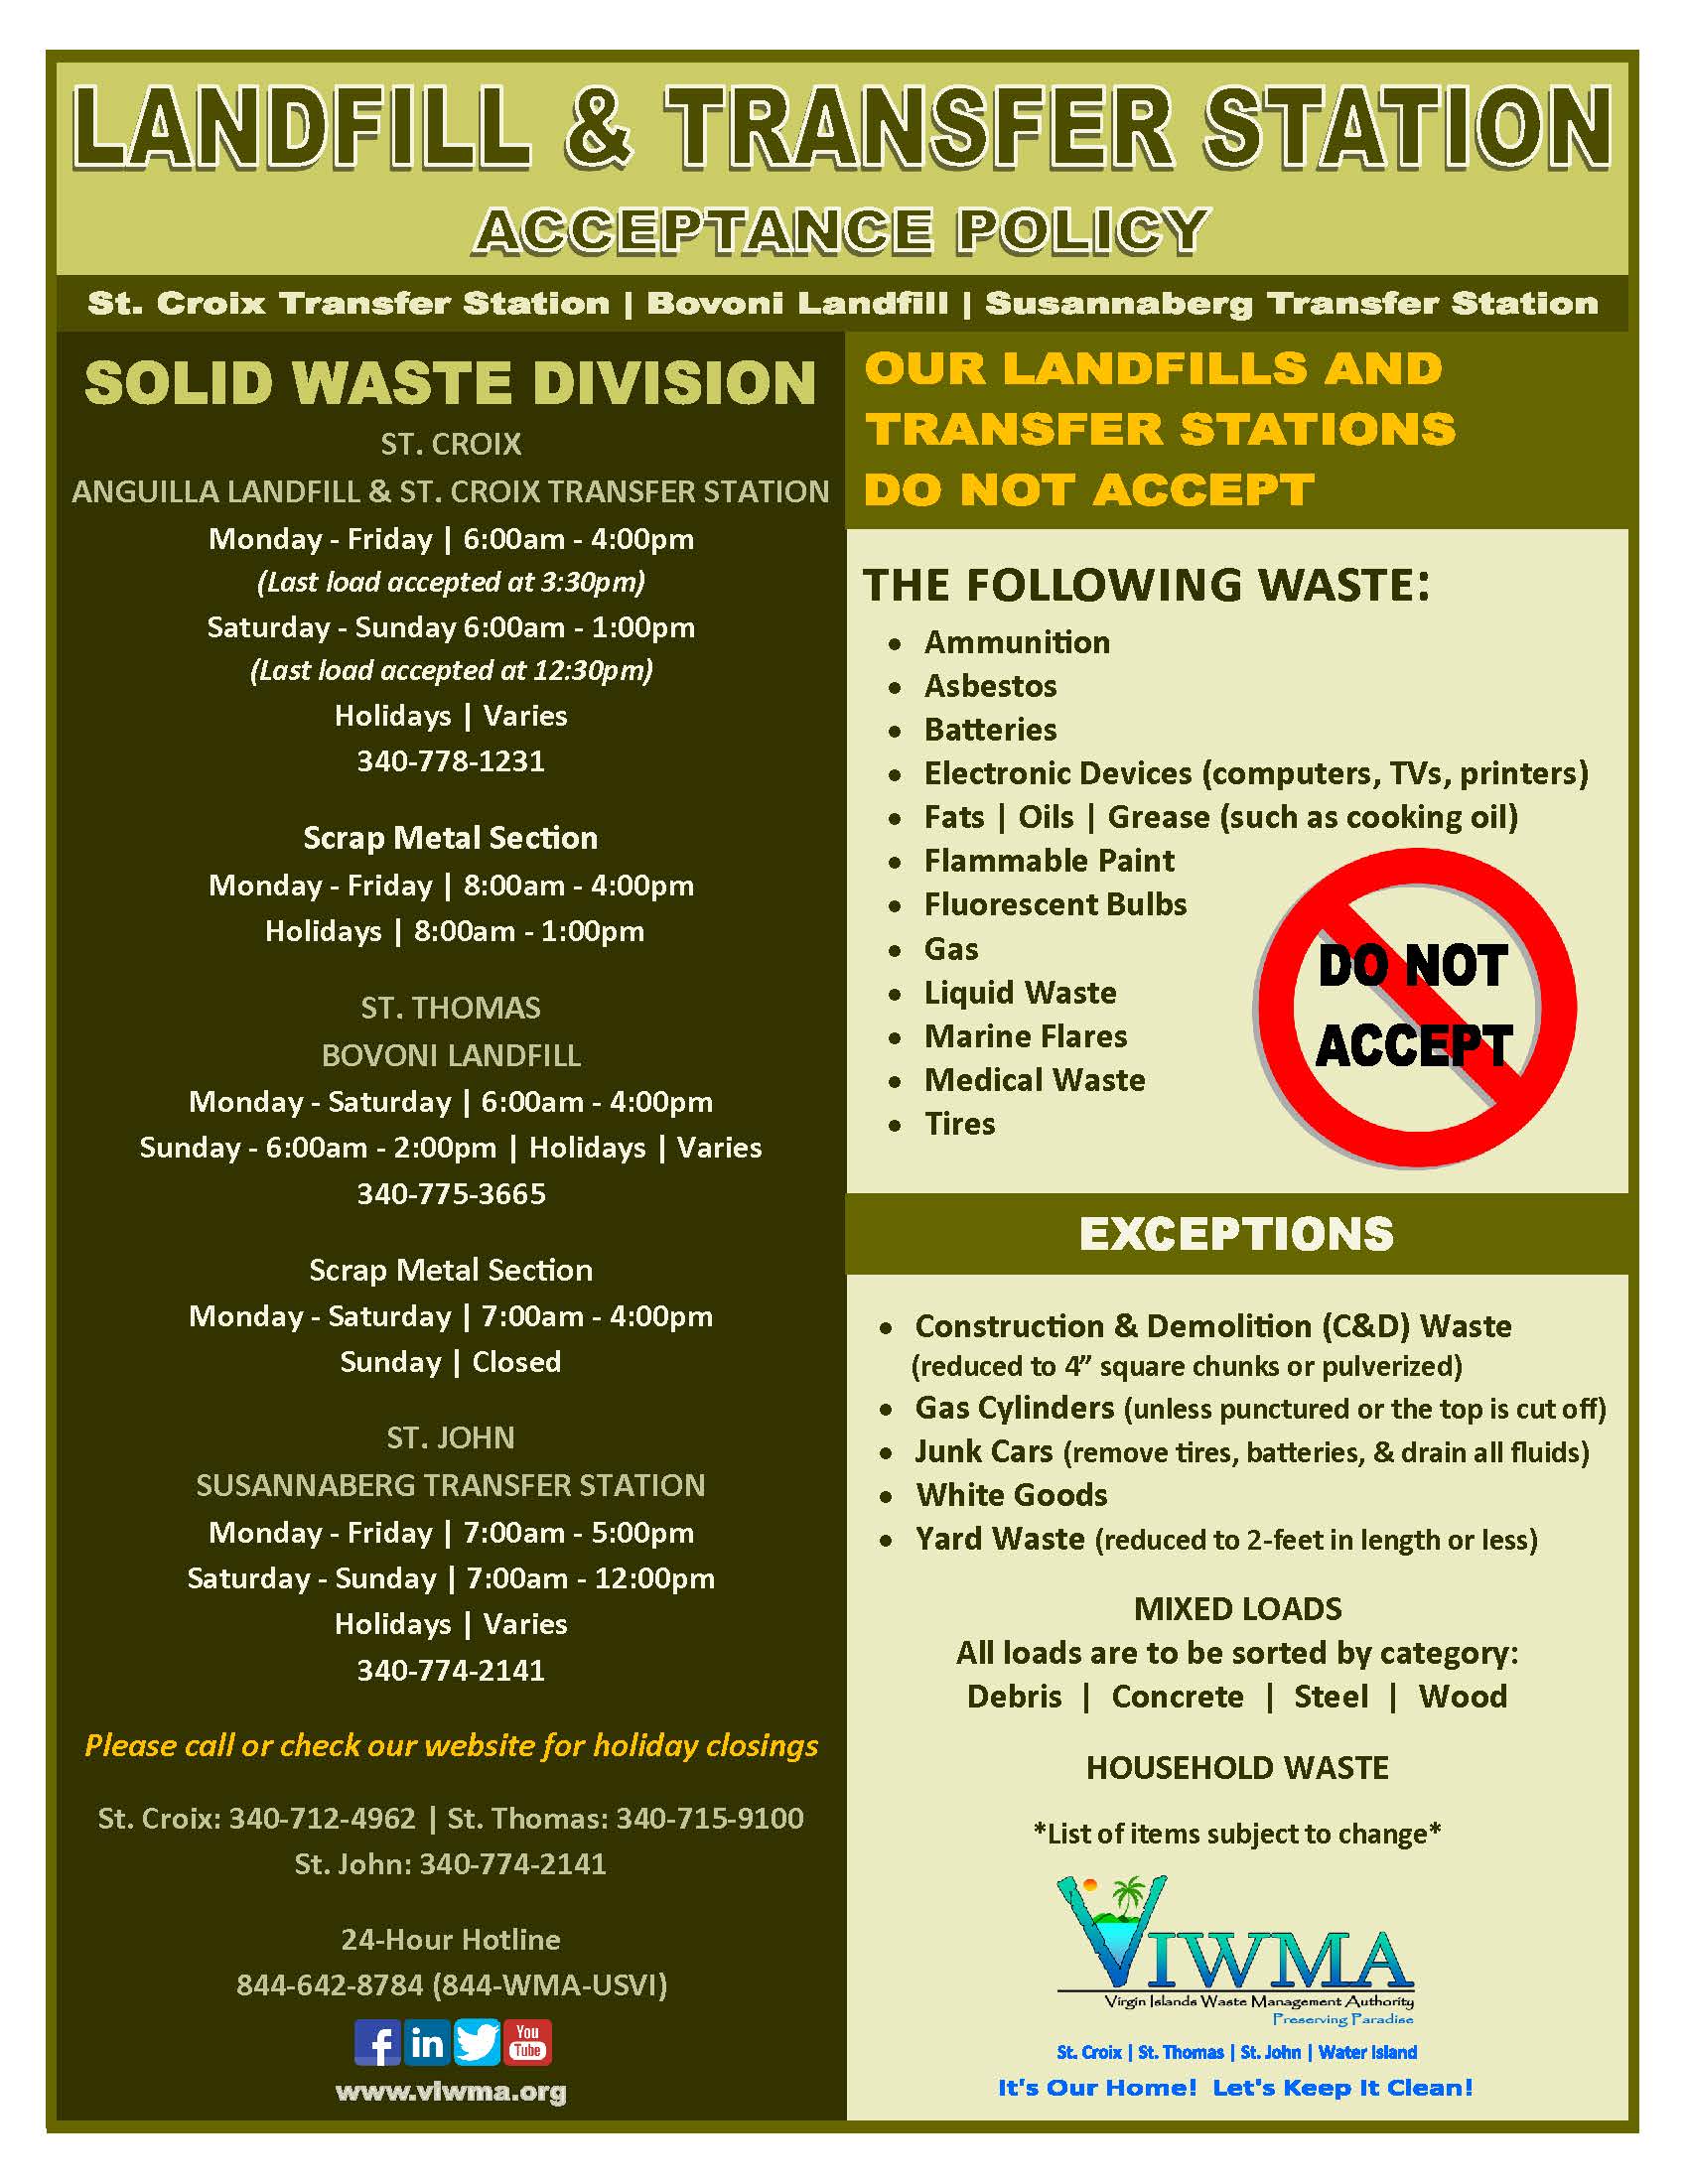 Landfill Transfer Station Bin Site Acceptance Policy Flyer Page 1